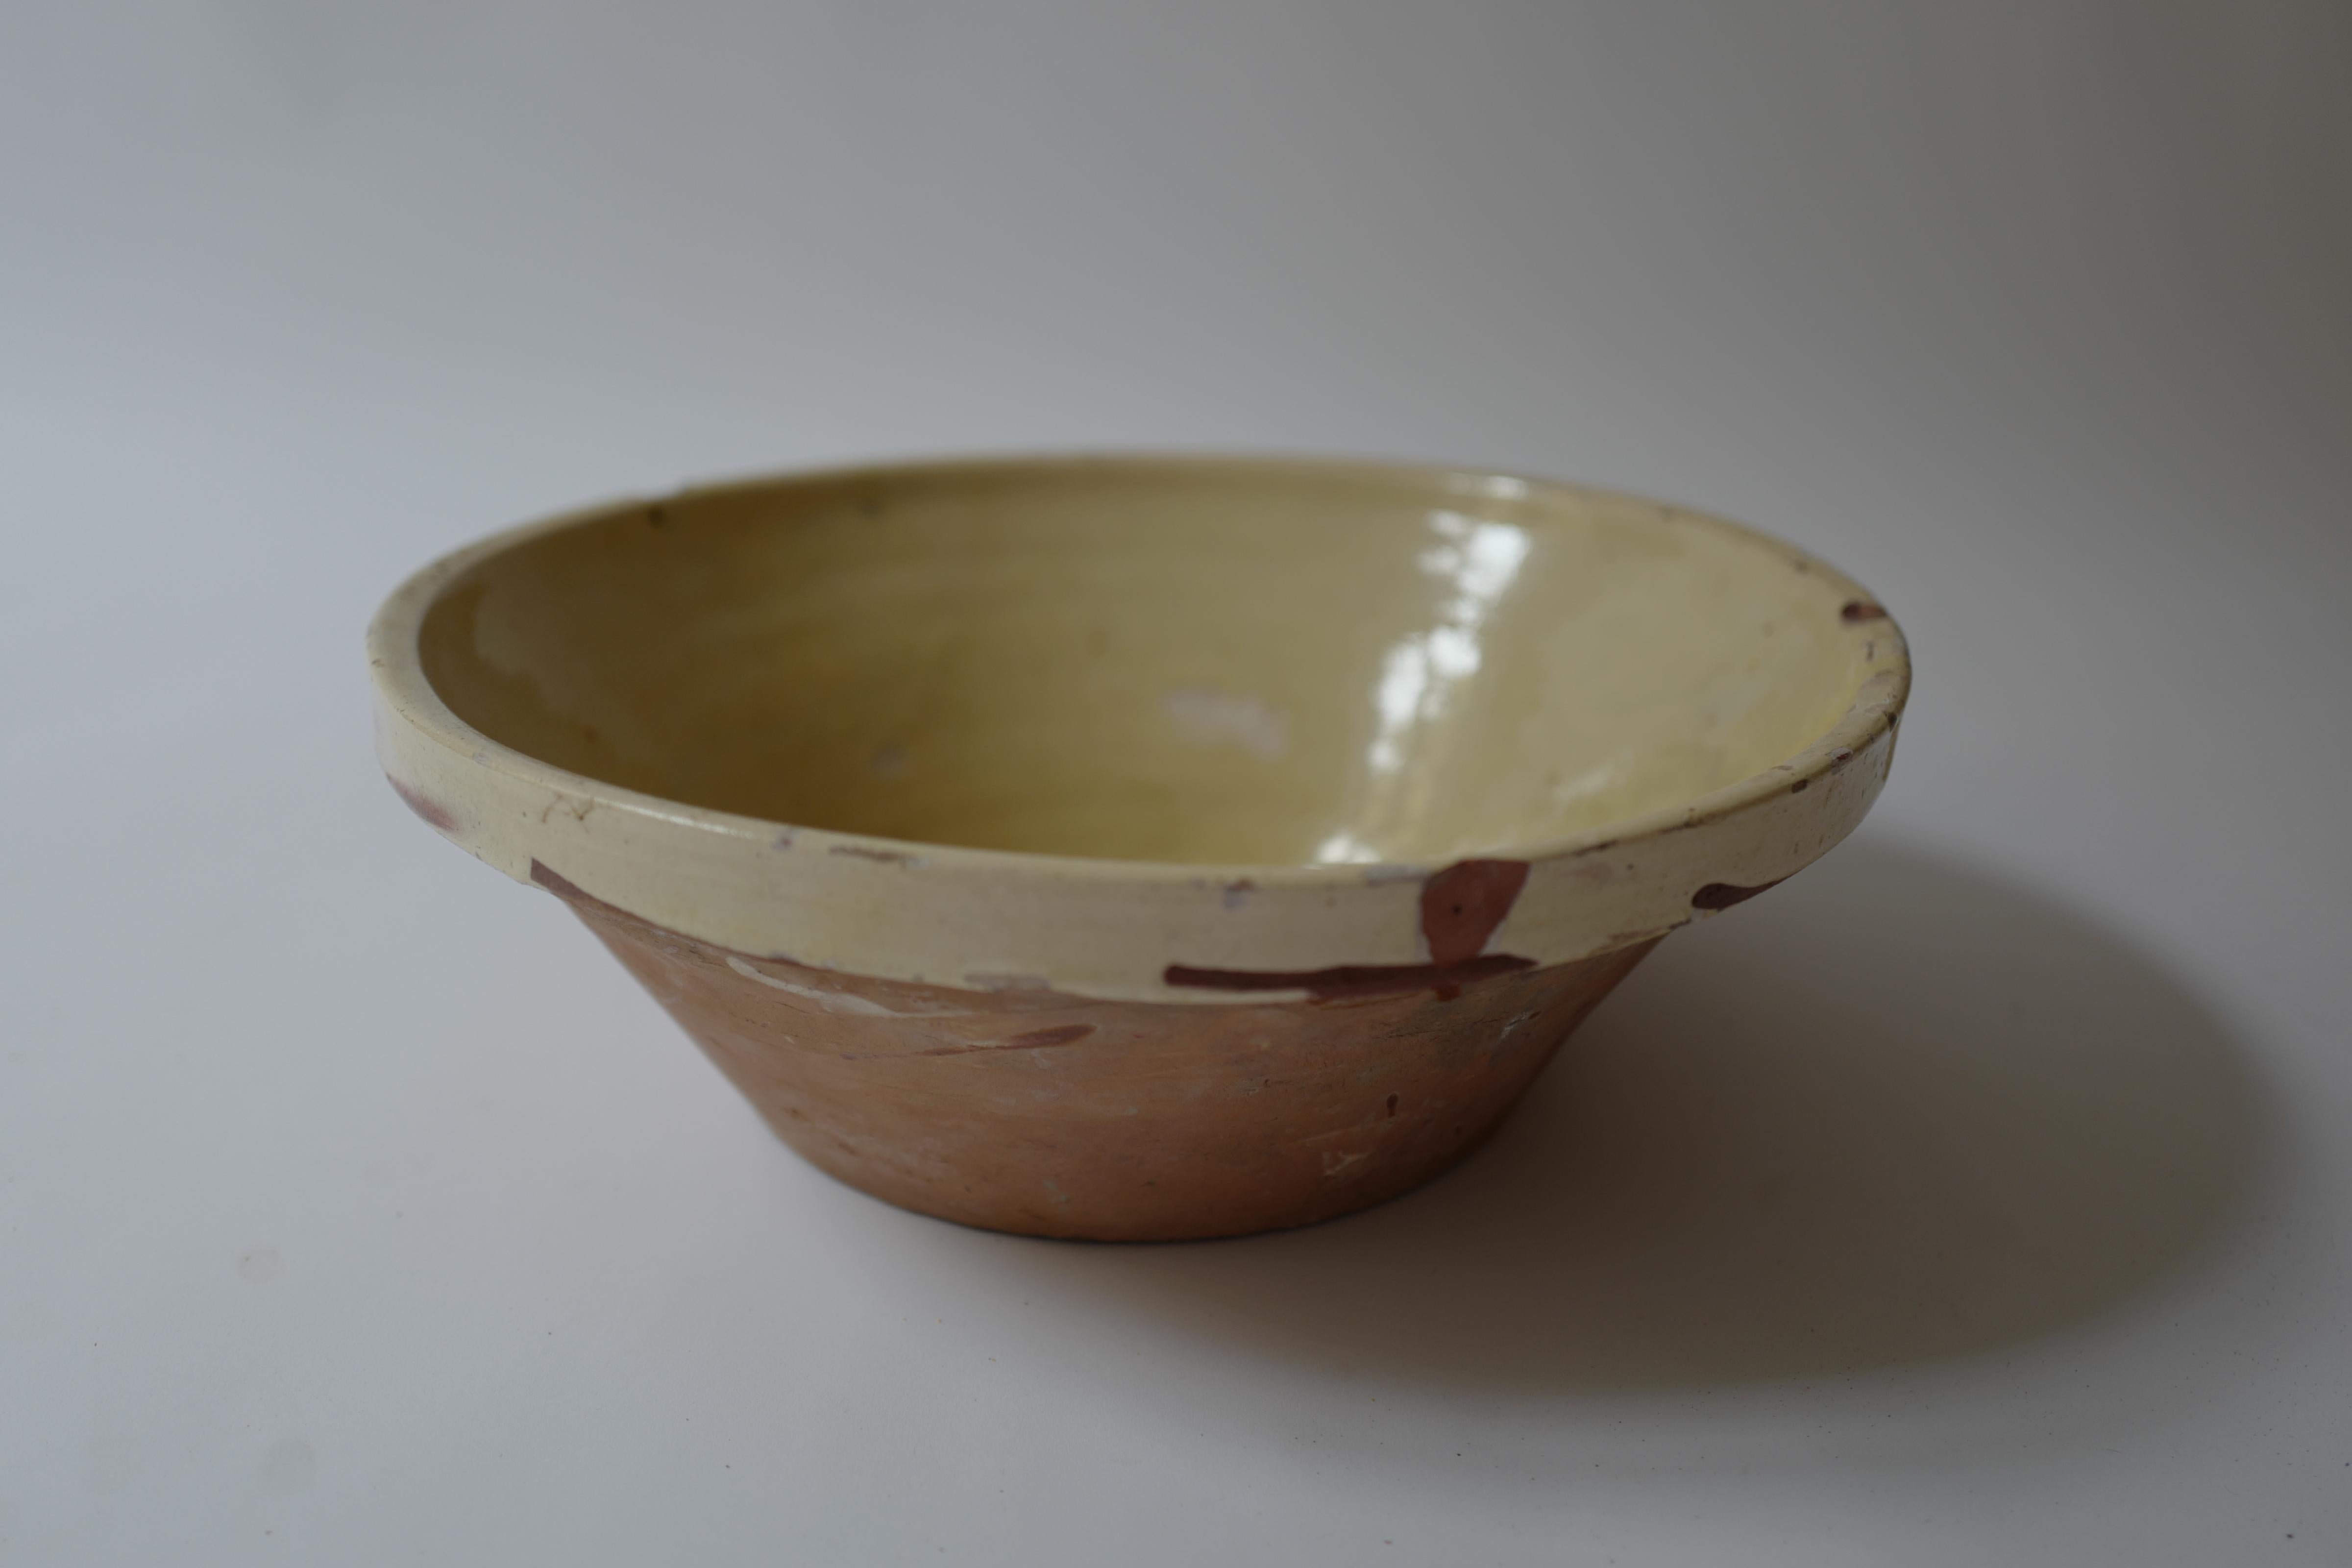 Antique French Provincial Tian bowl in light yellow. Beautiful time worn patina. Circa early 19th century found in Provence, France. These were used for preparation as mixing bowls made of earthenware. The tian style bowl is originally from